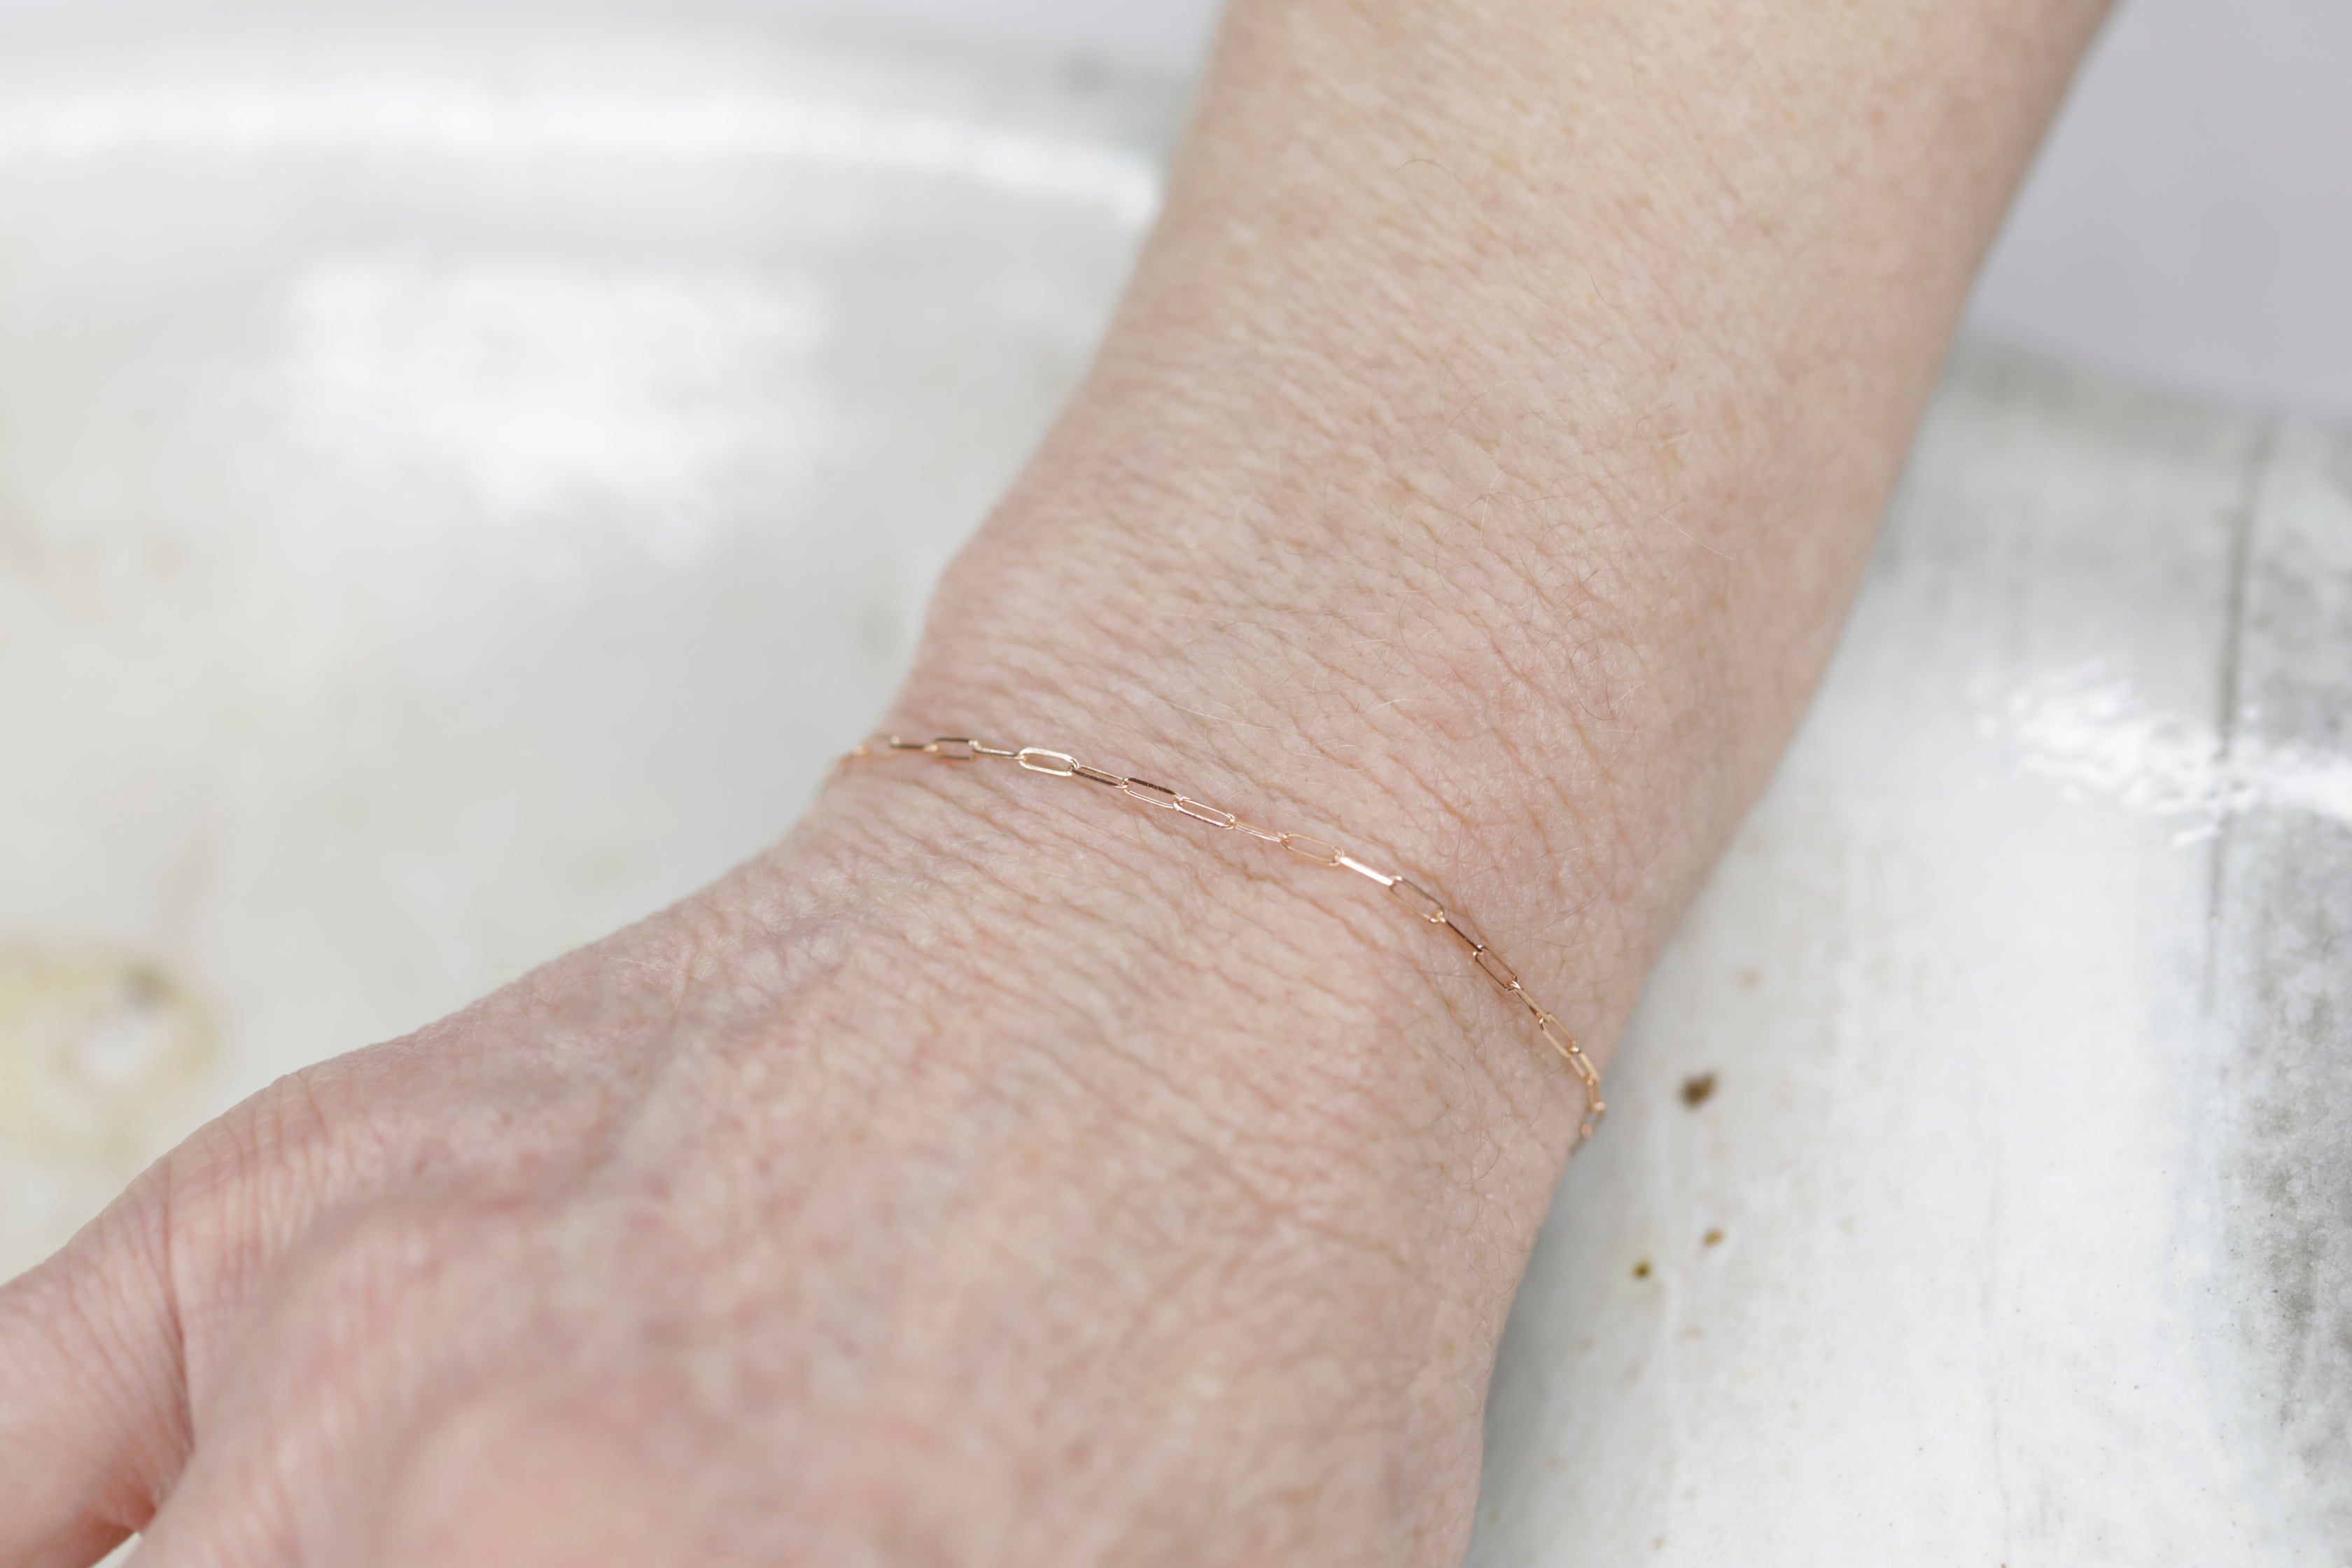 Permanent Jewelry | Poet and The Bench | Micro Paperclip Chain Bracelet 14K Rose / 6.75